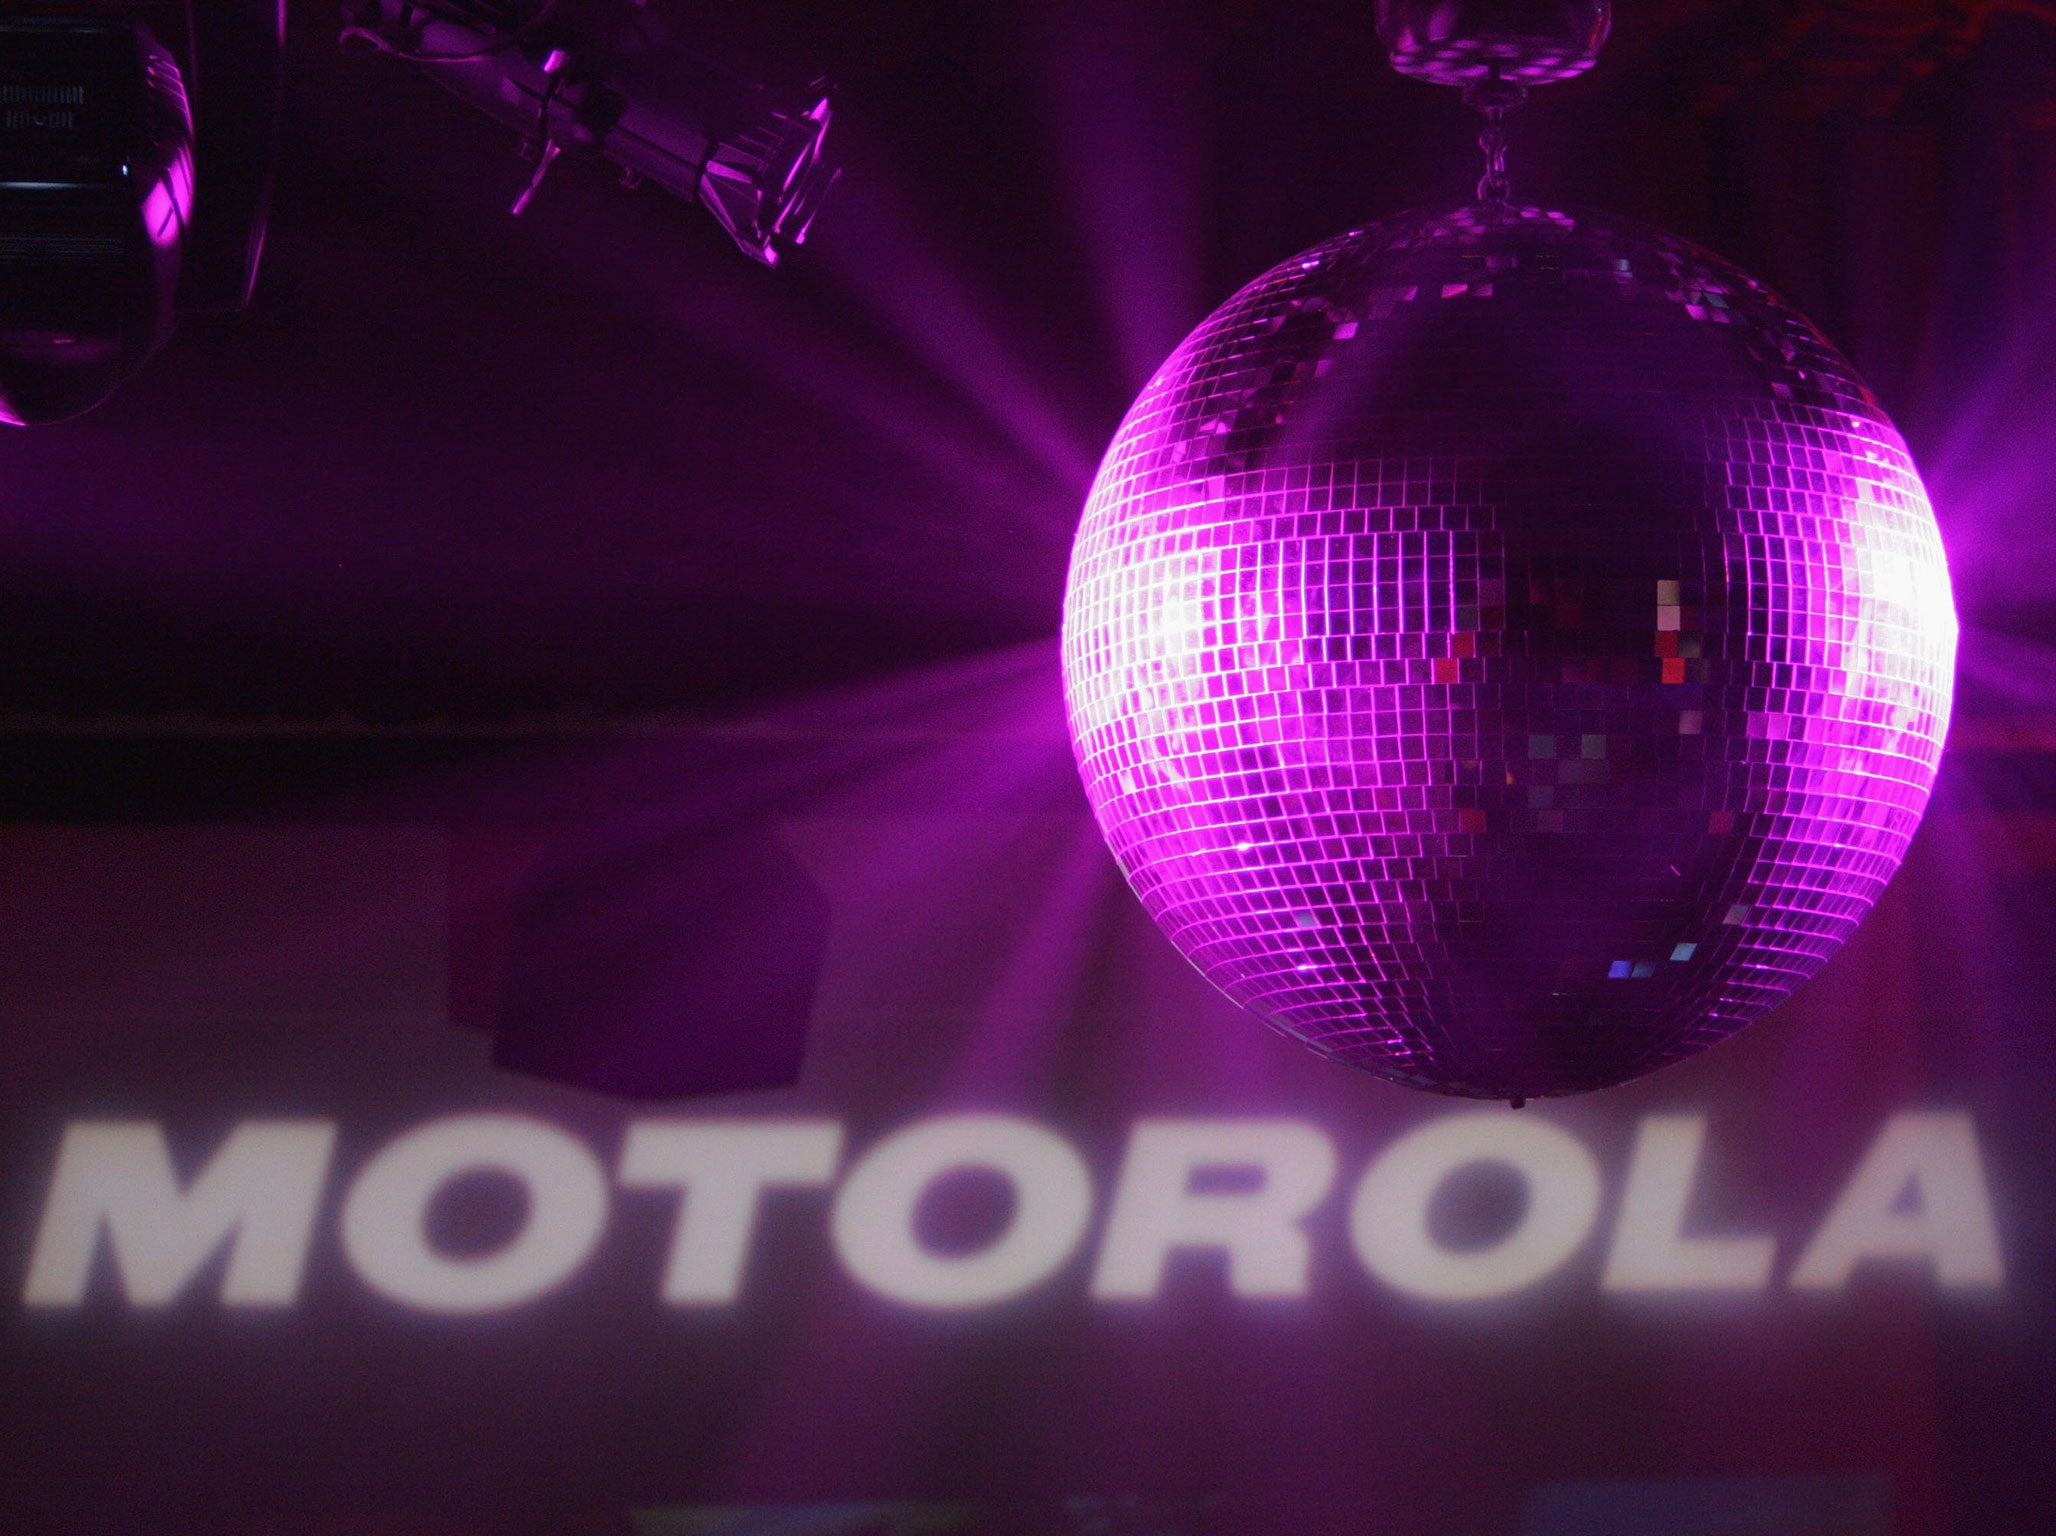 A disco ball shines inside the Music Box Theatre where Motorola hosted their sixth anniversary party